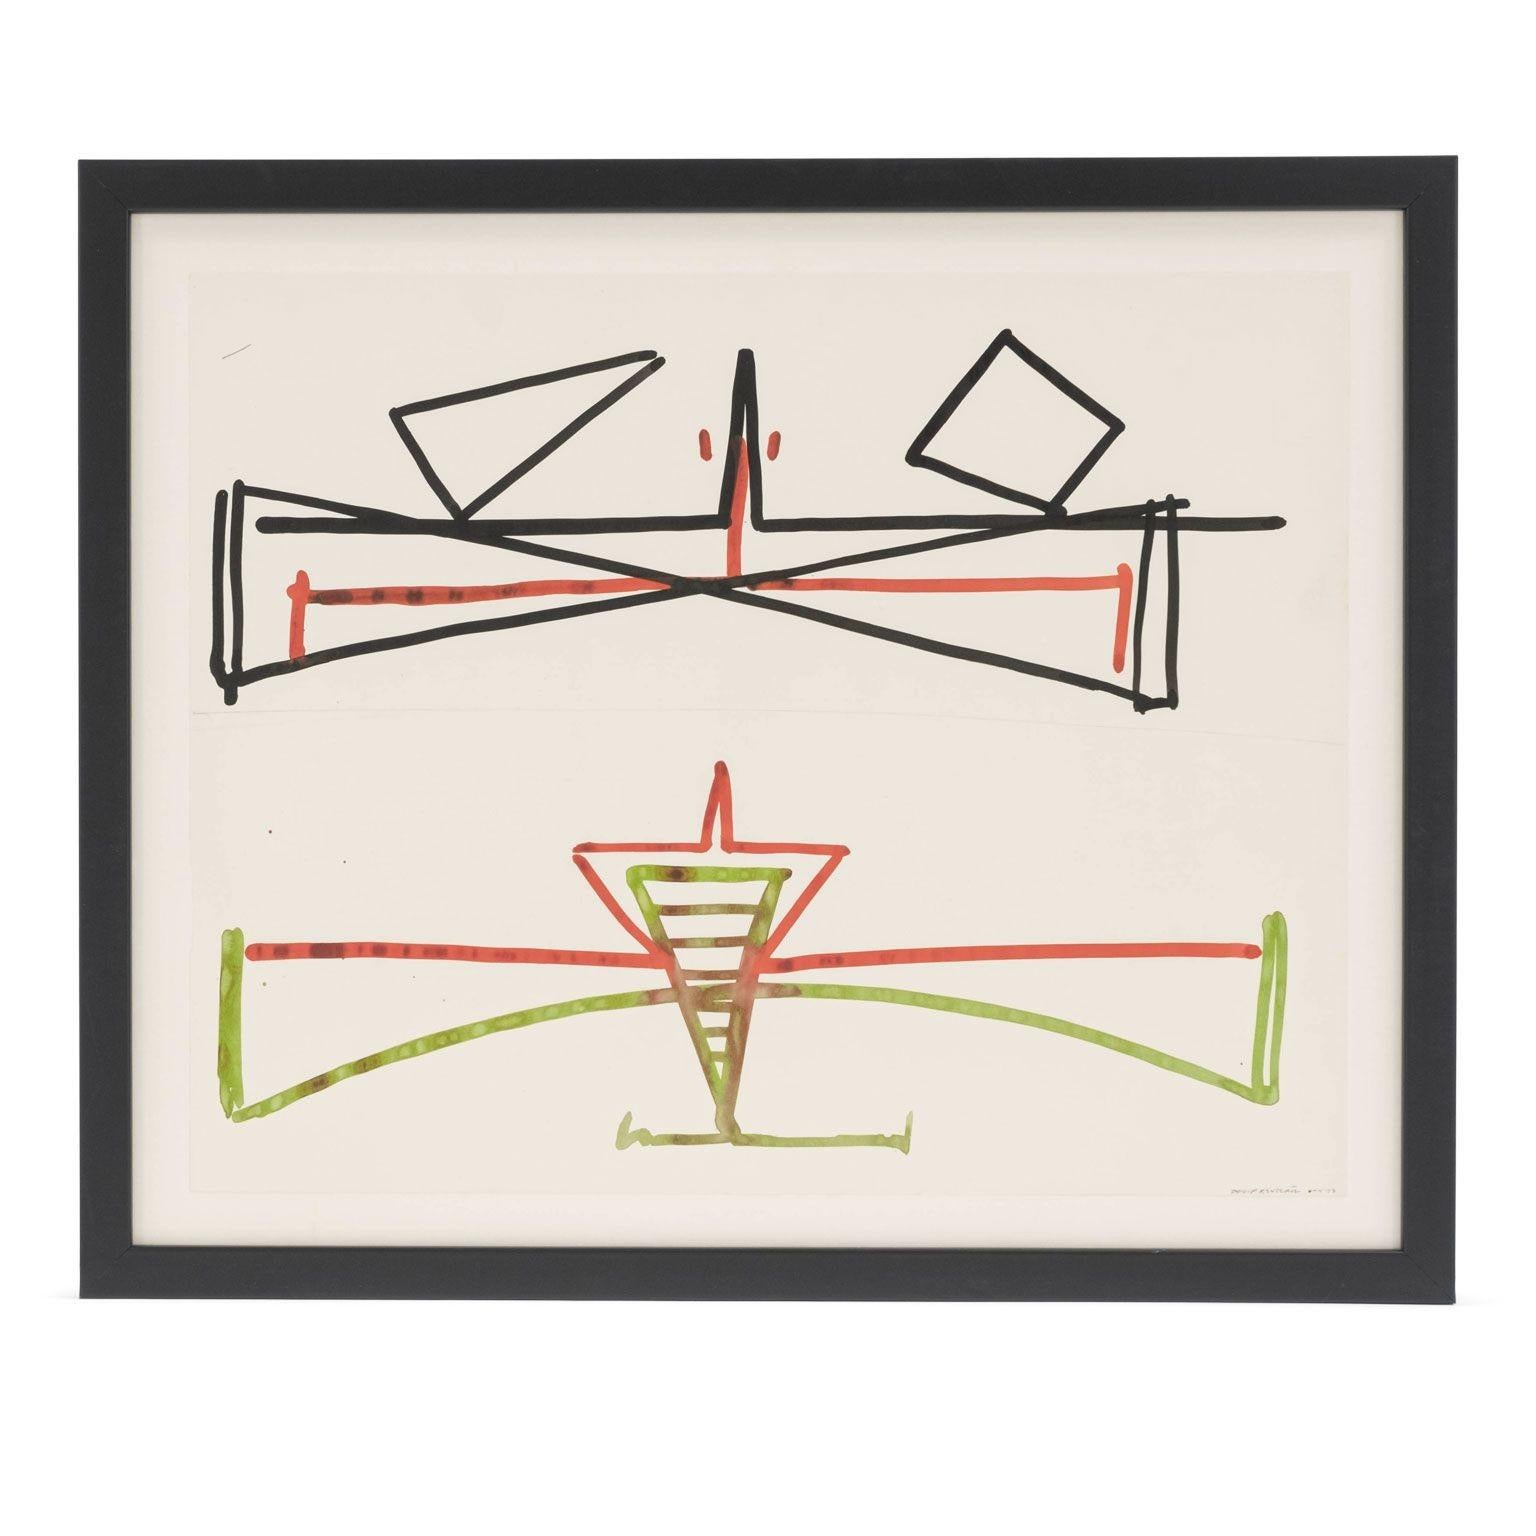 Abstract mixed medium-on-paper by Philip Renteria (1947-1998), 1973. Untitled gouache and ink on paper, both dated and hand-signed by artist. Newly-framed, float-mounted within black metal frame over a linen backing. Two paintings available. Sold